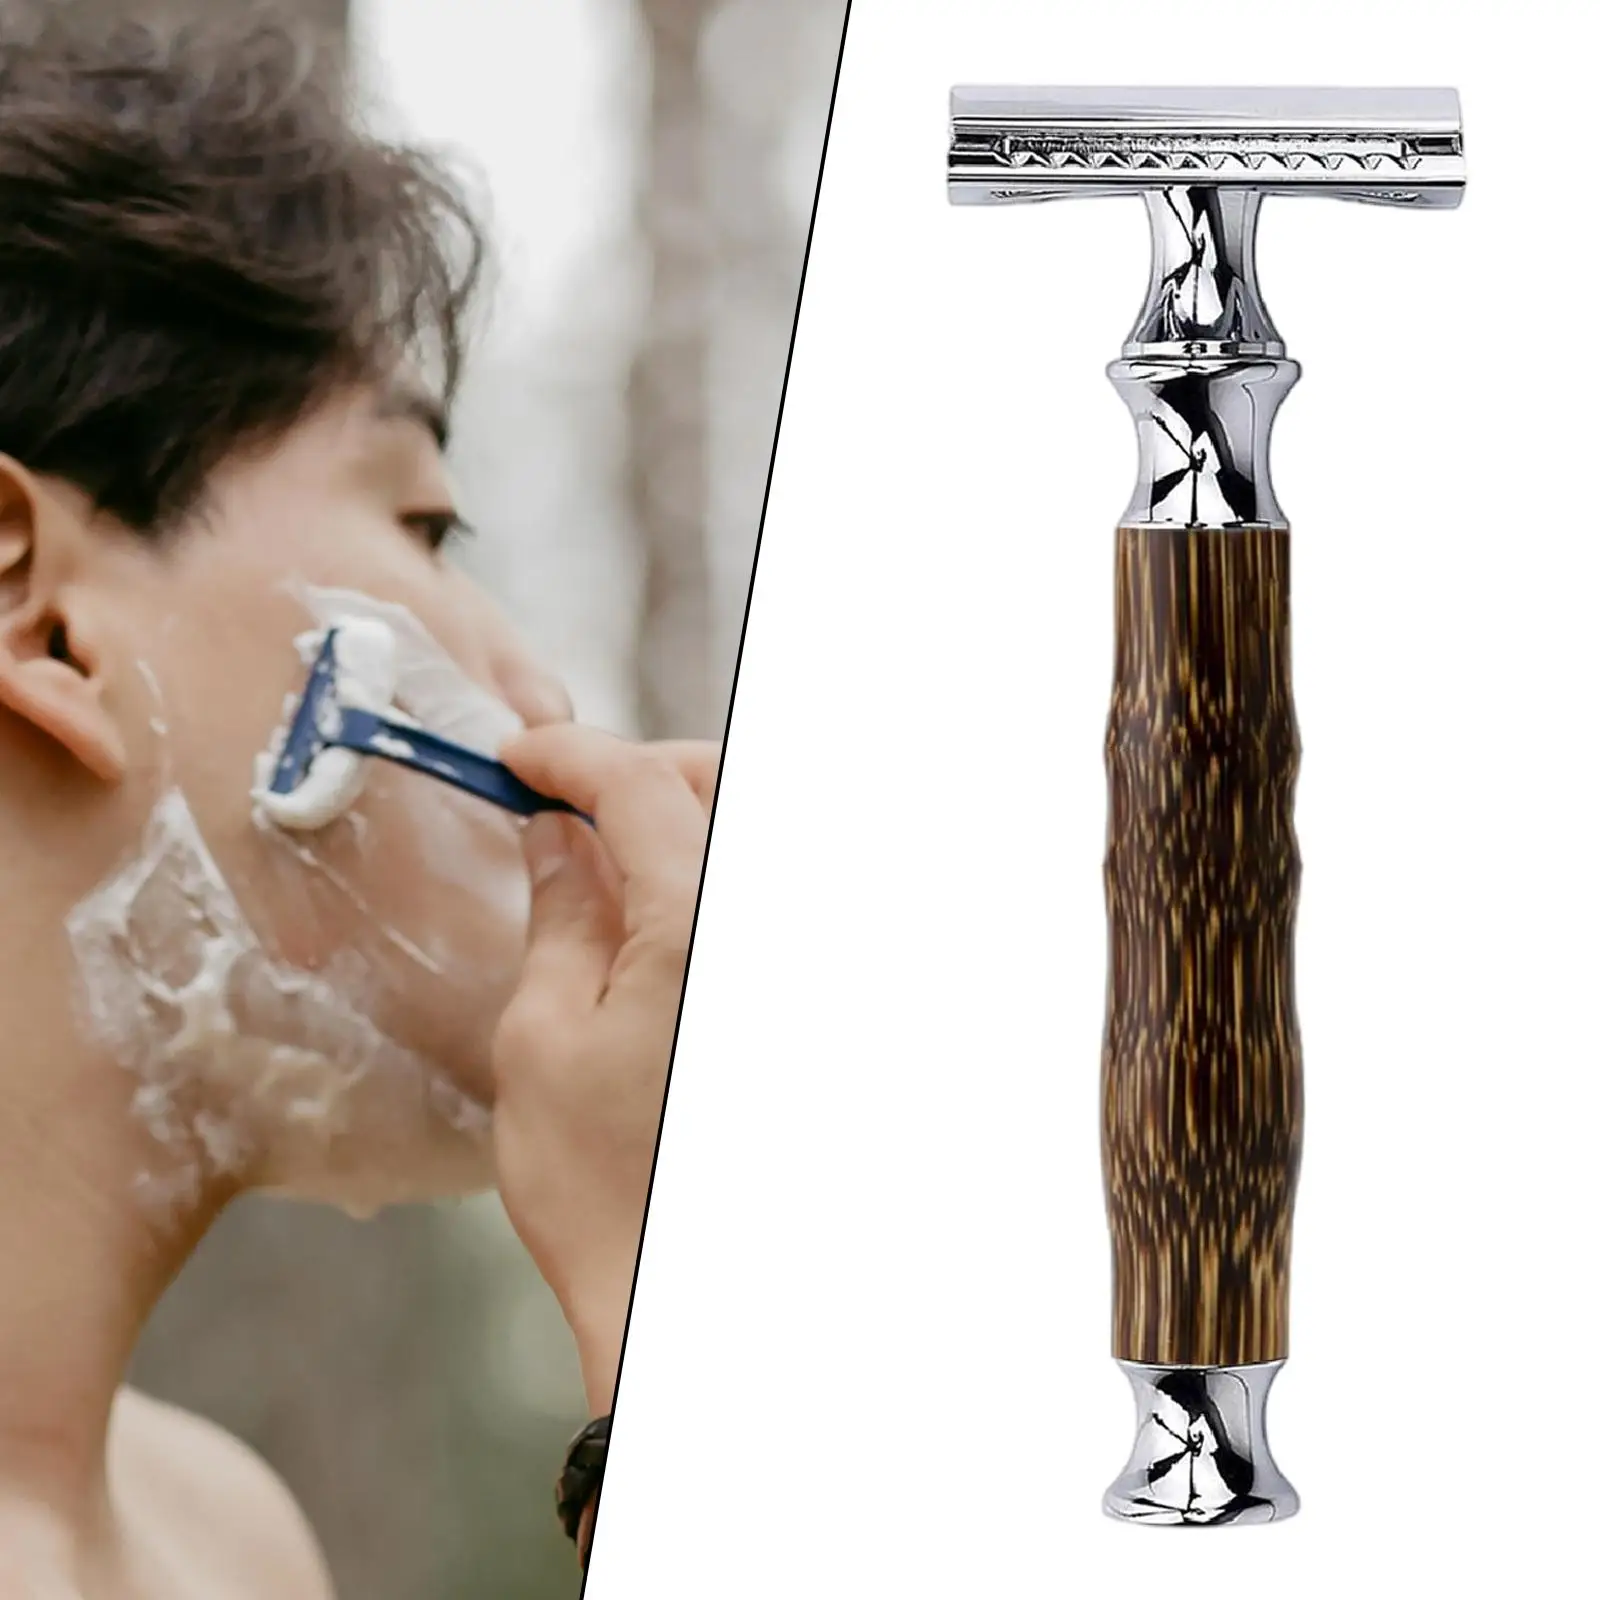 Manual Facial Hair Shaver Double Edge Beard Styling Men Safety Razor Shaving Razors for Father`s Day Birthday Grandfather Dad